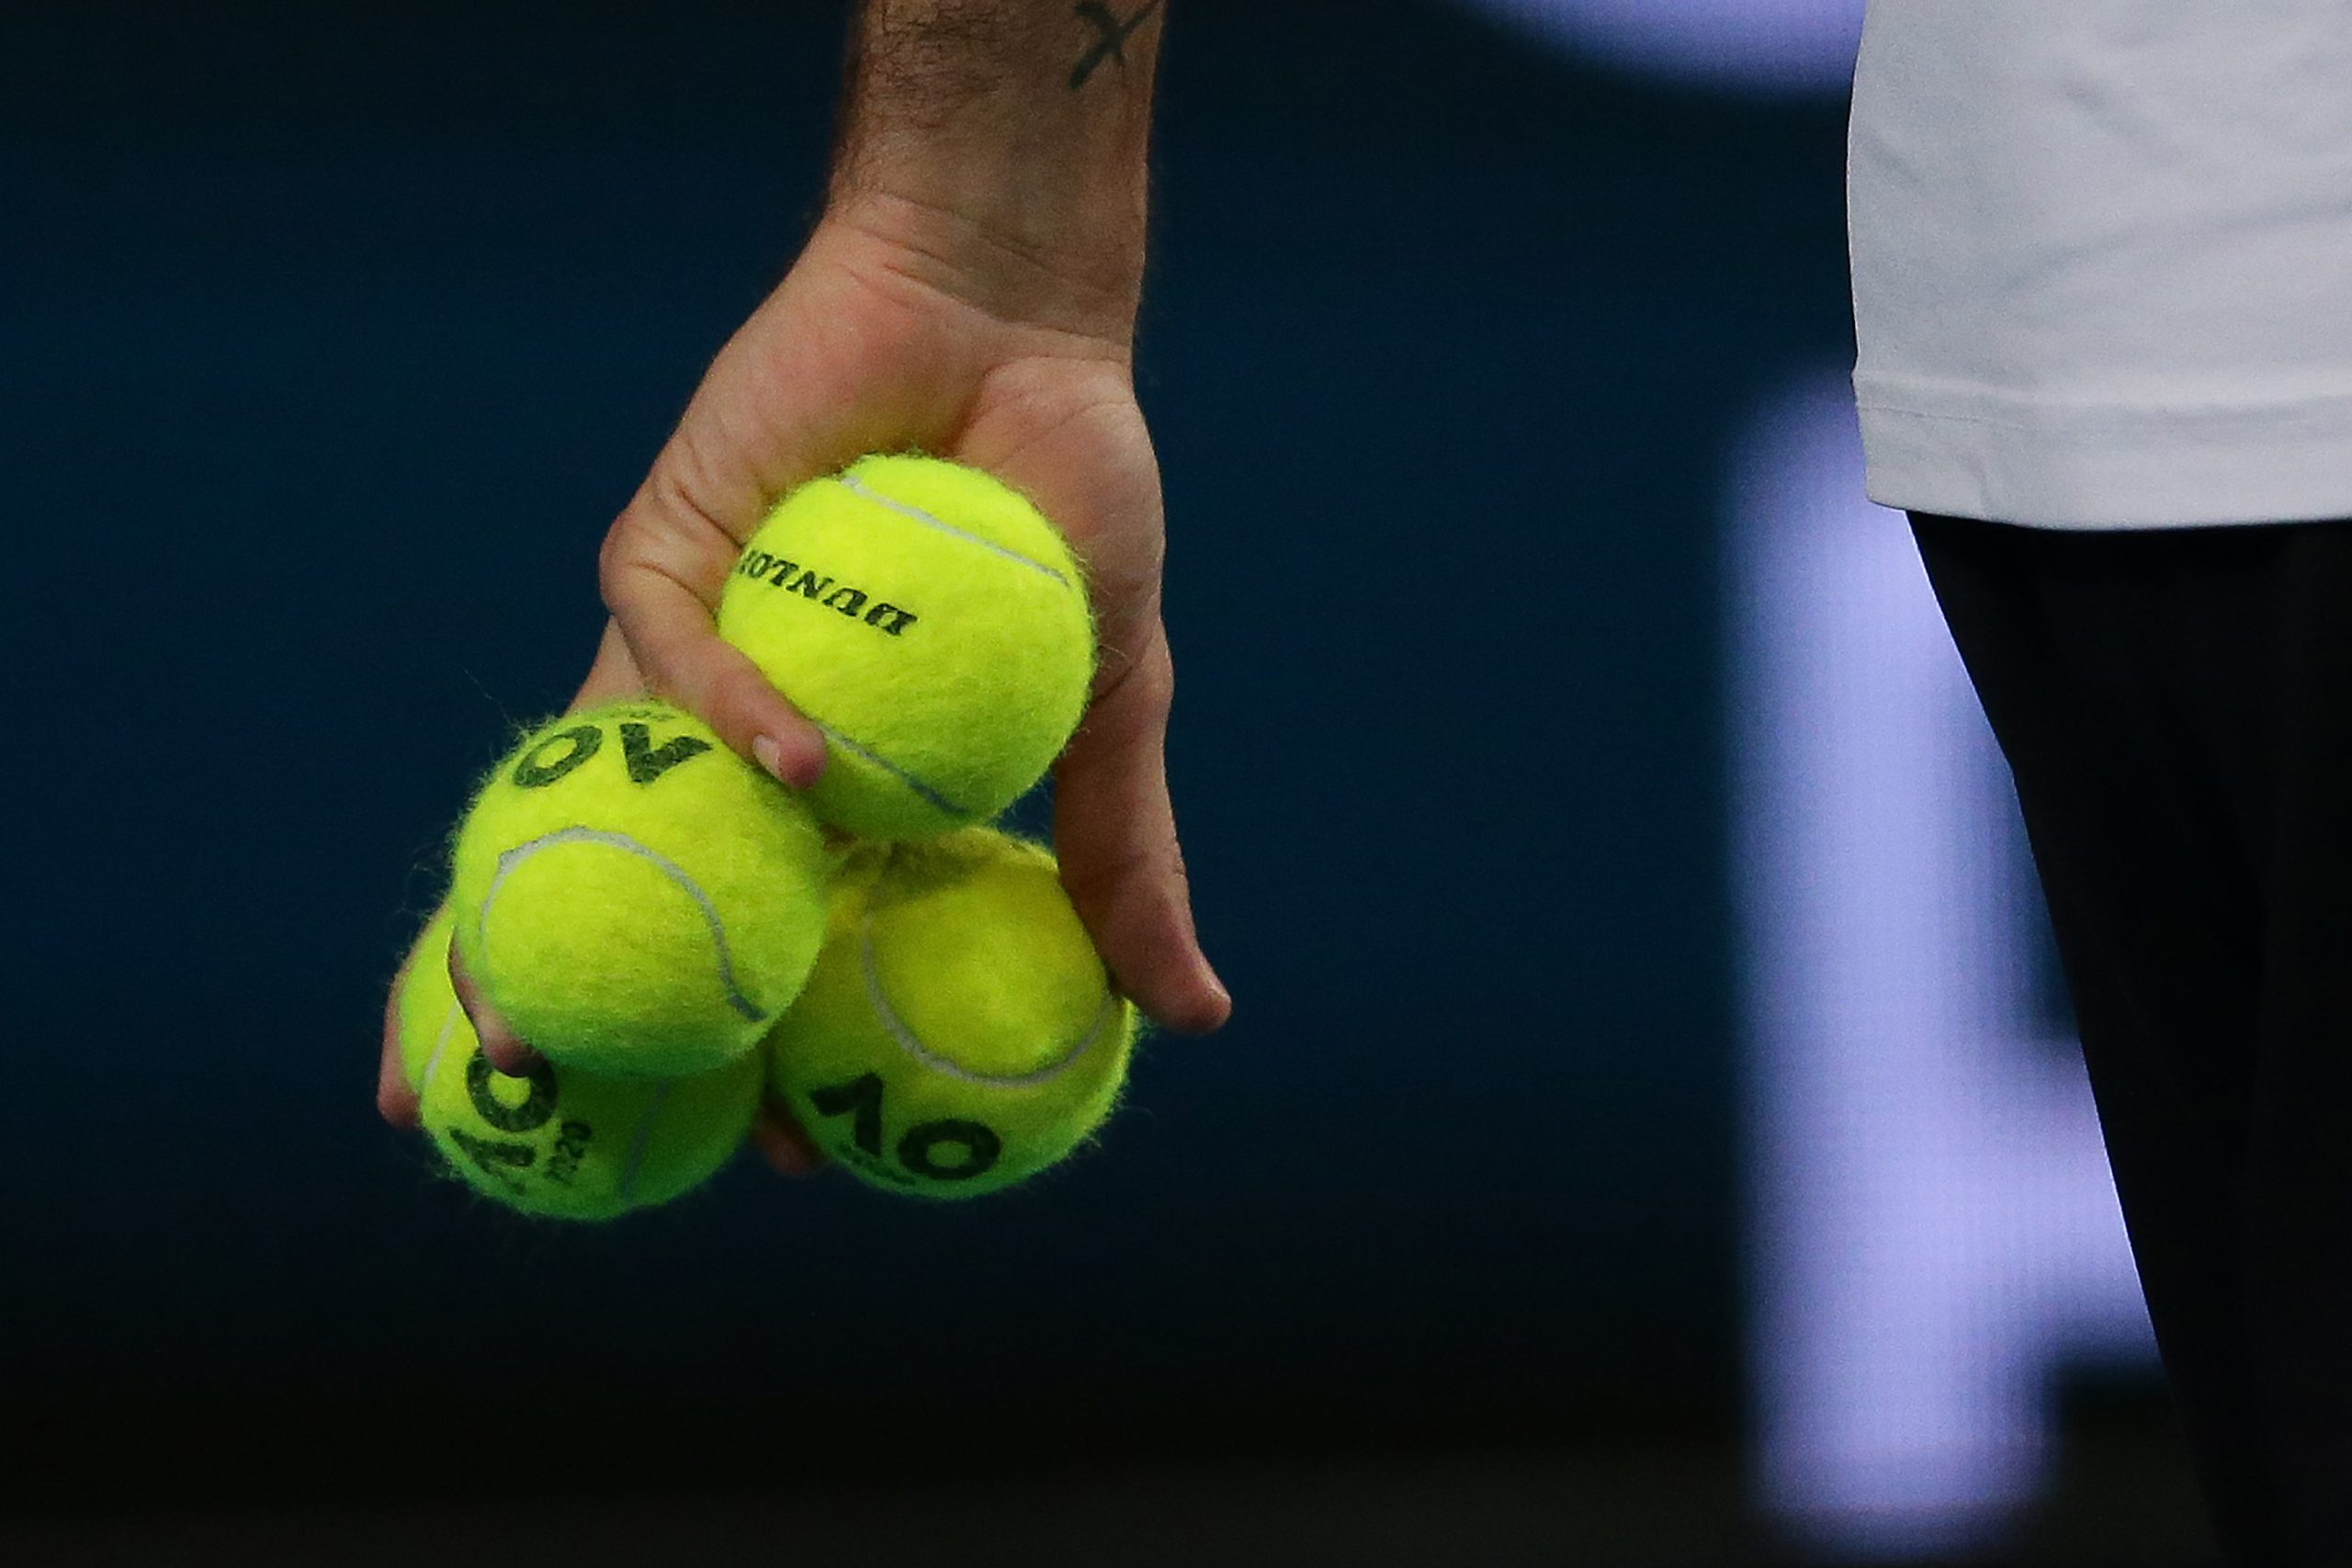 Dunlop tennis balls being used at the 2020 Australian Open (Getty Images)